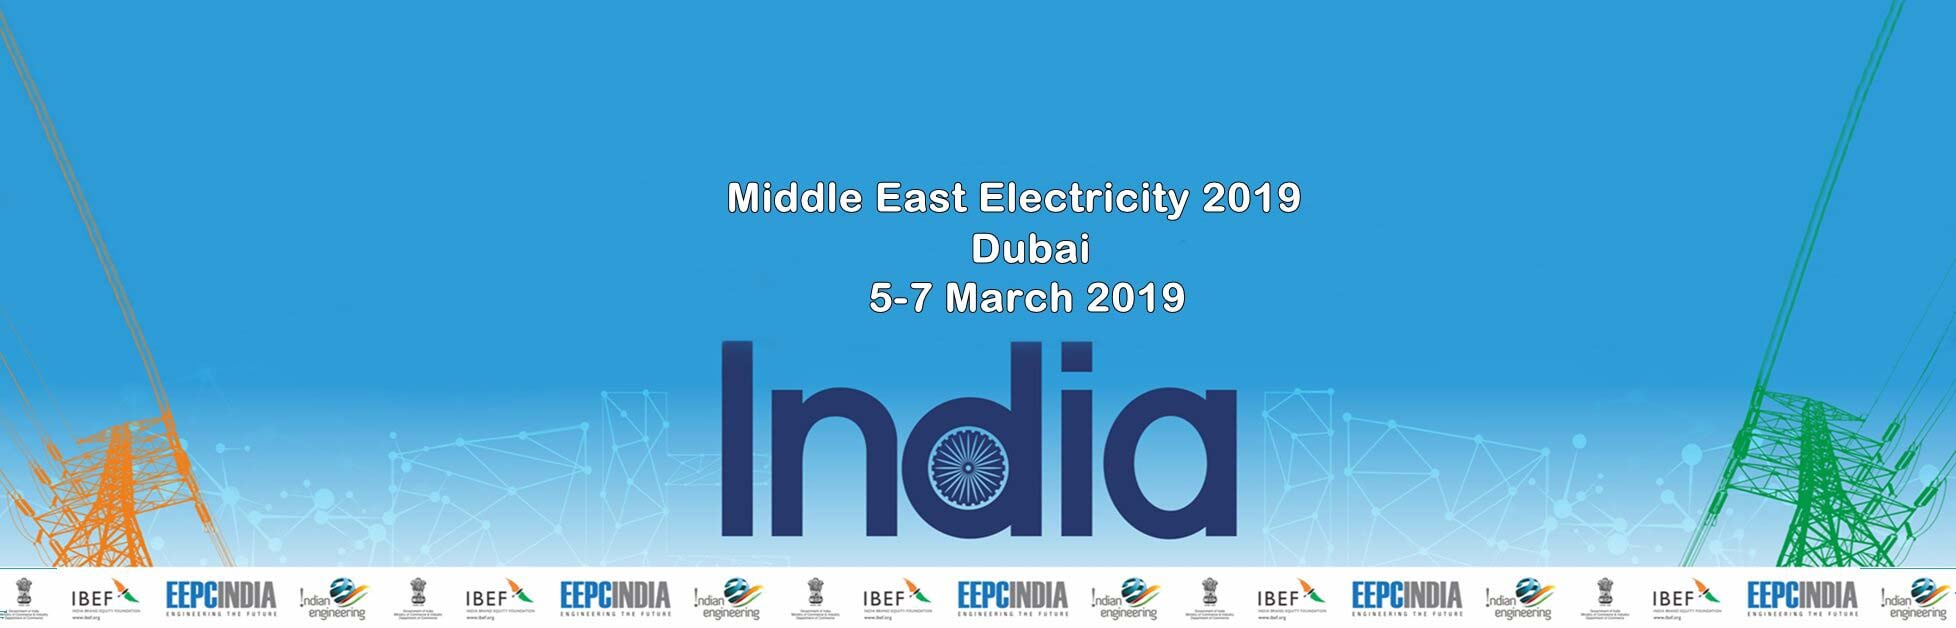 Middle East Electricity (MEE) 2019